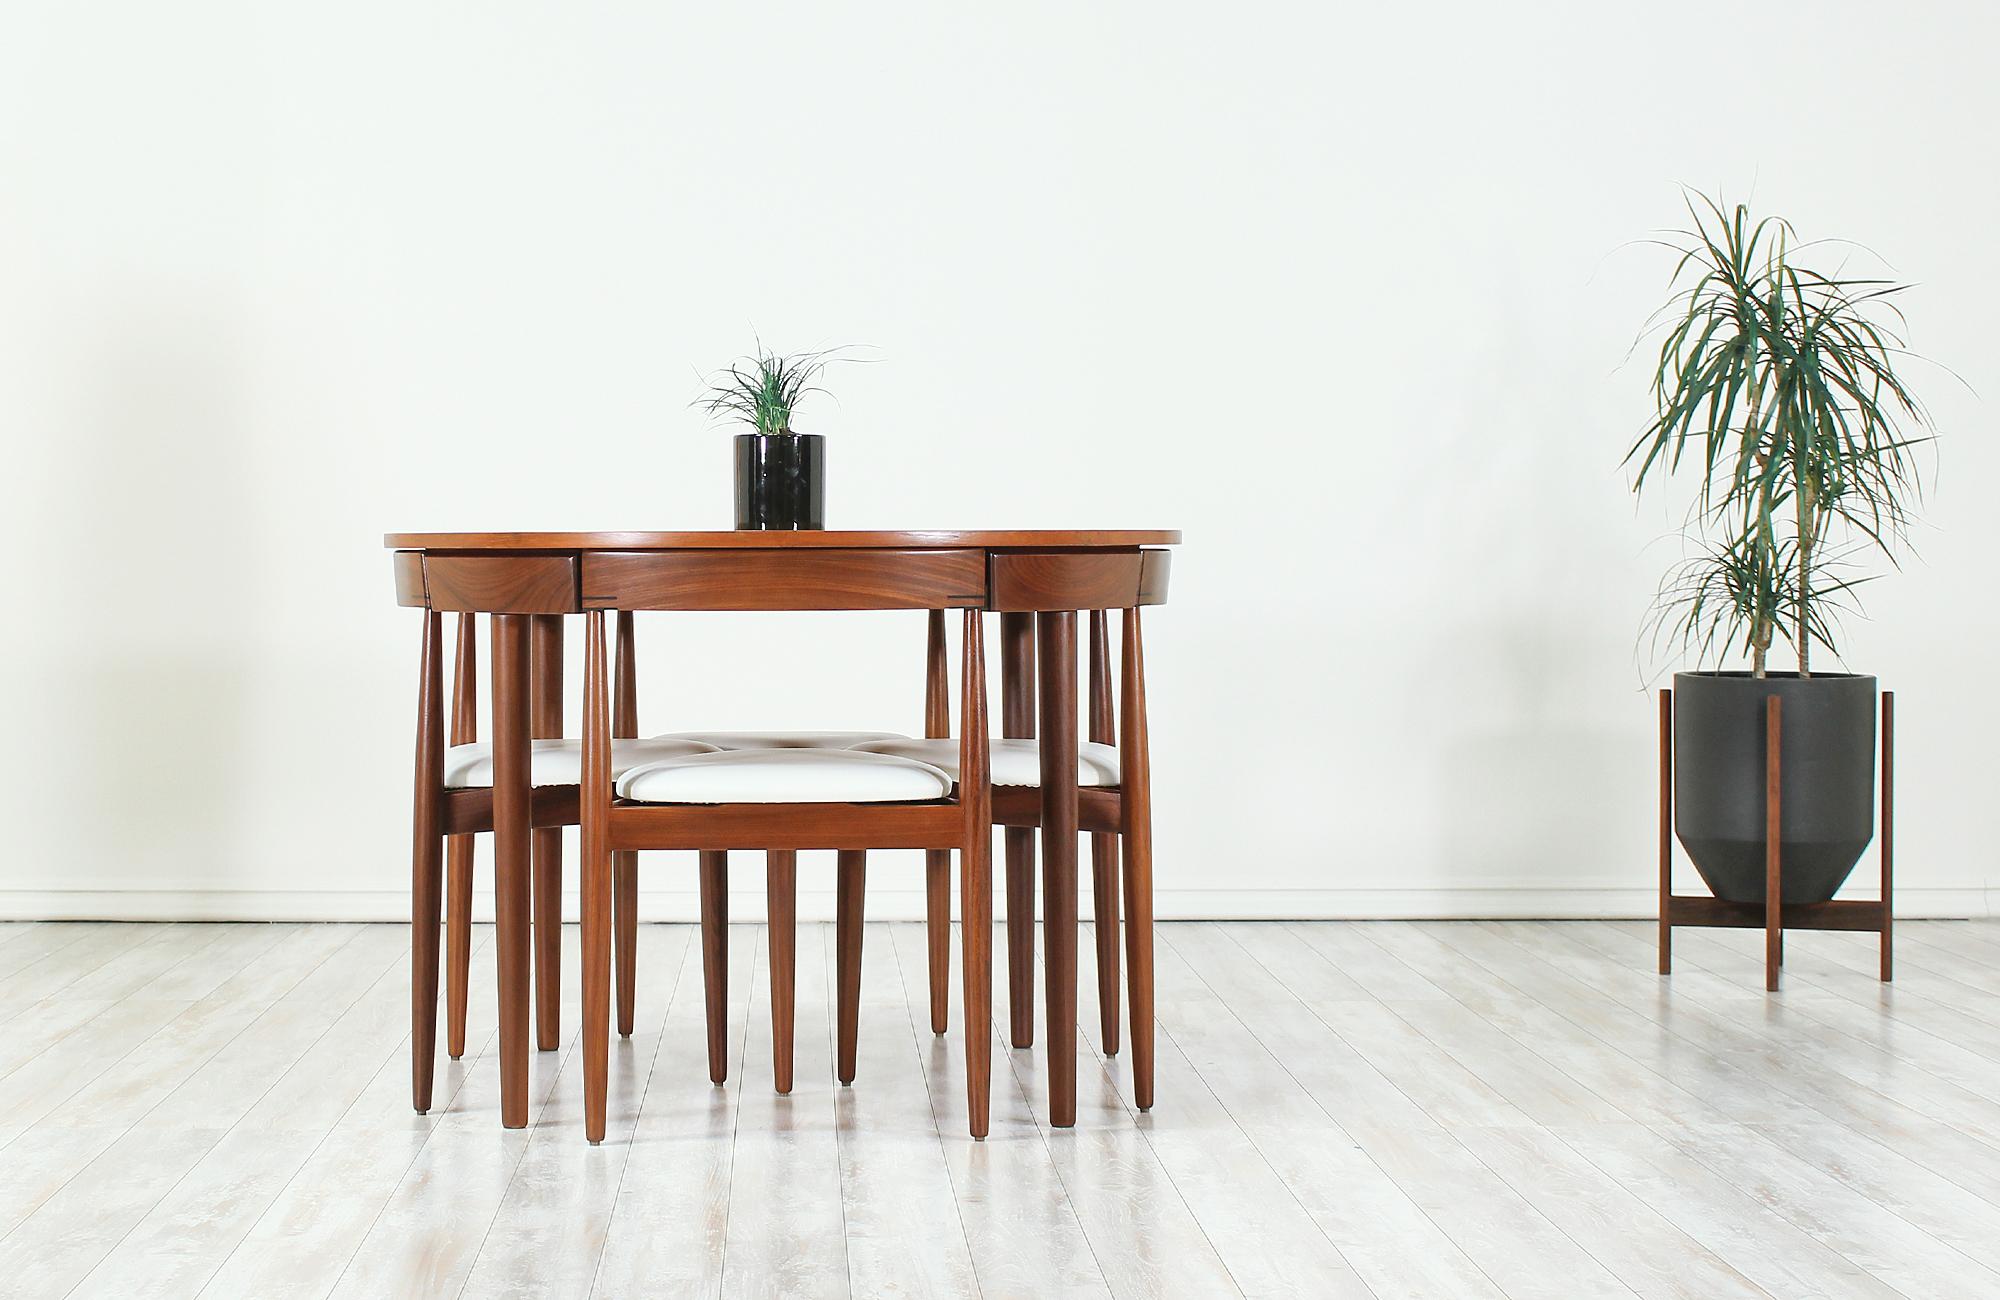 Unique “Roundette” dining set designed by Hans Olsen for Frem Rølje in Denmark, circa 1960s. This striking dining set features a teak wood round table and four dining chairs. The dining chairs seamlessly tuck into the table with their curved back